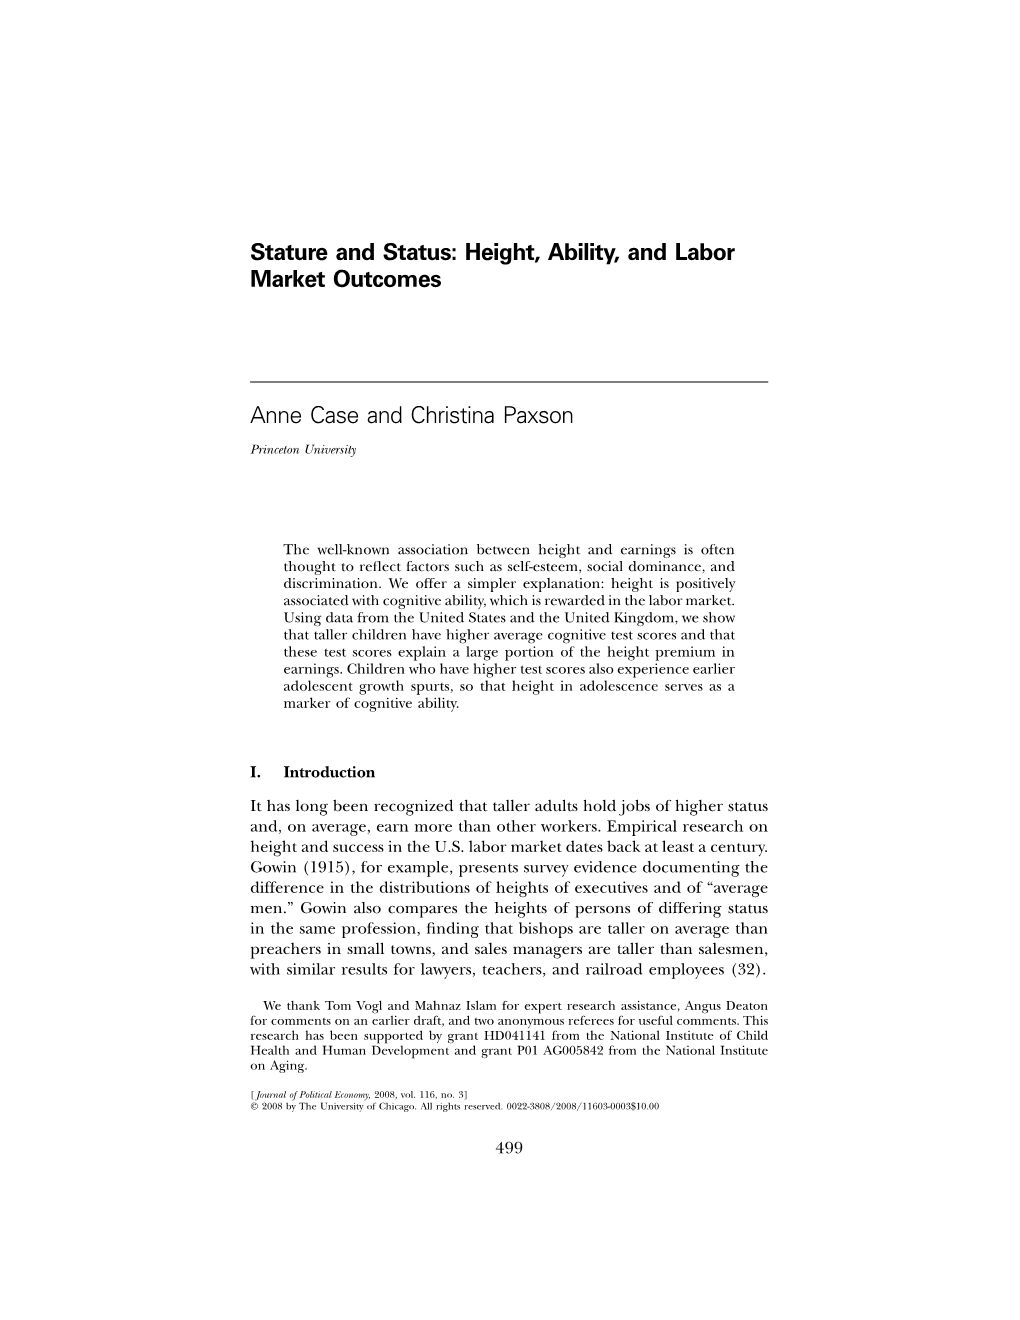 Stature and Status: Height, Ability, and Labor Market Outcomes Anne Case and Christina Paxson